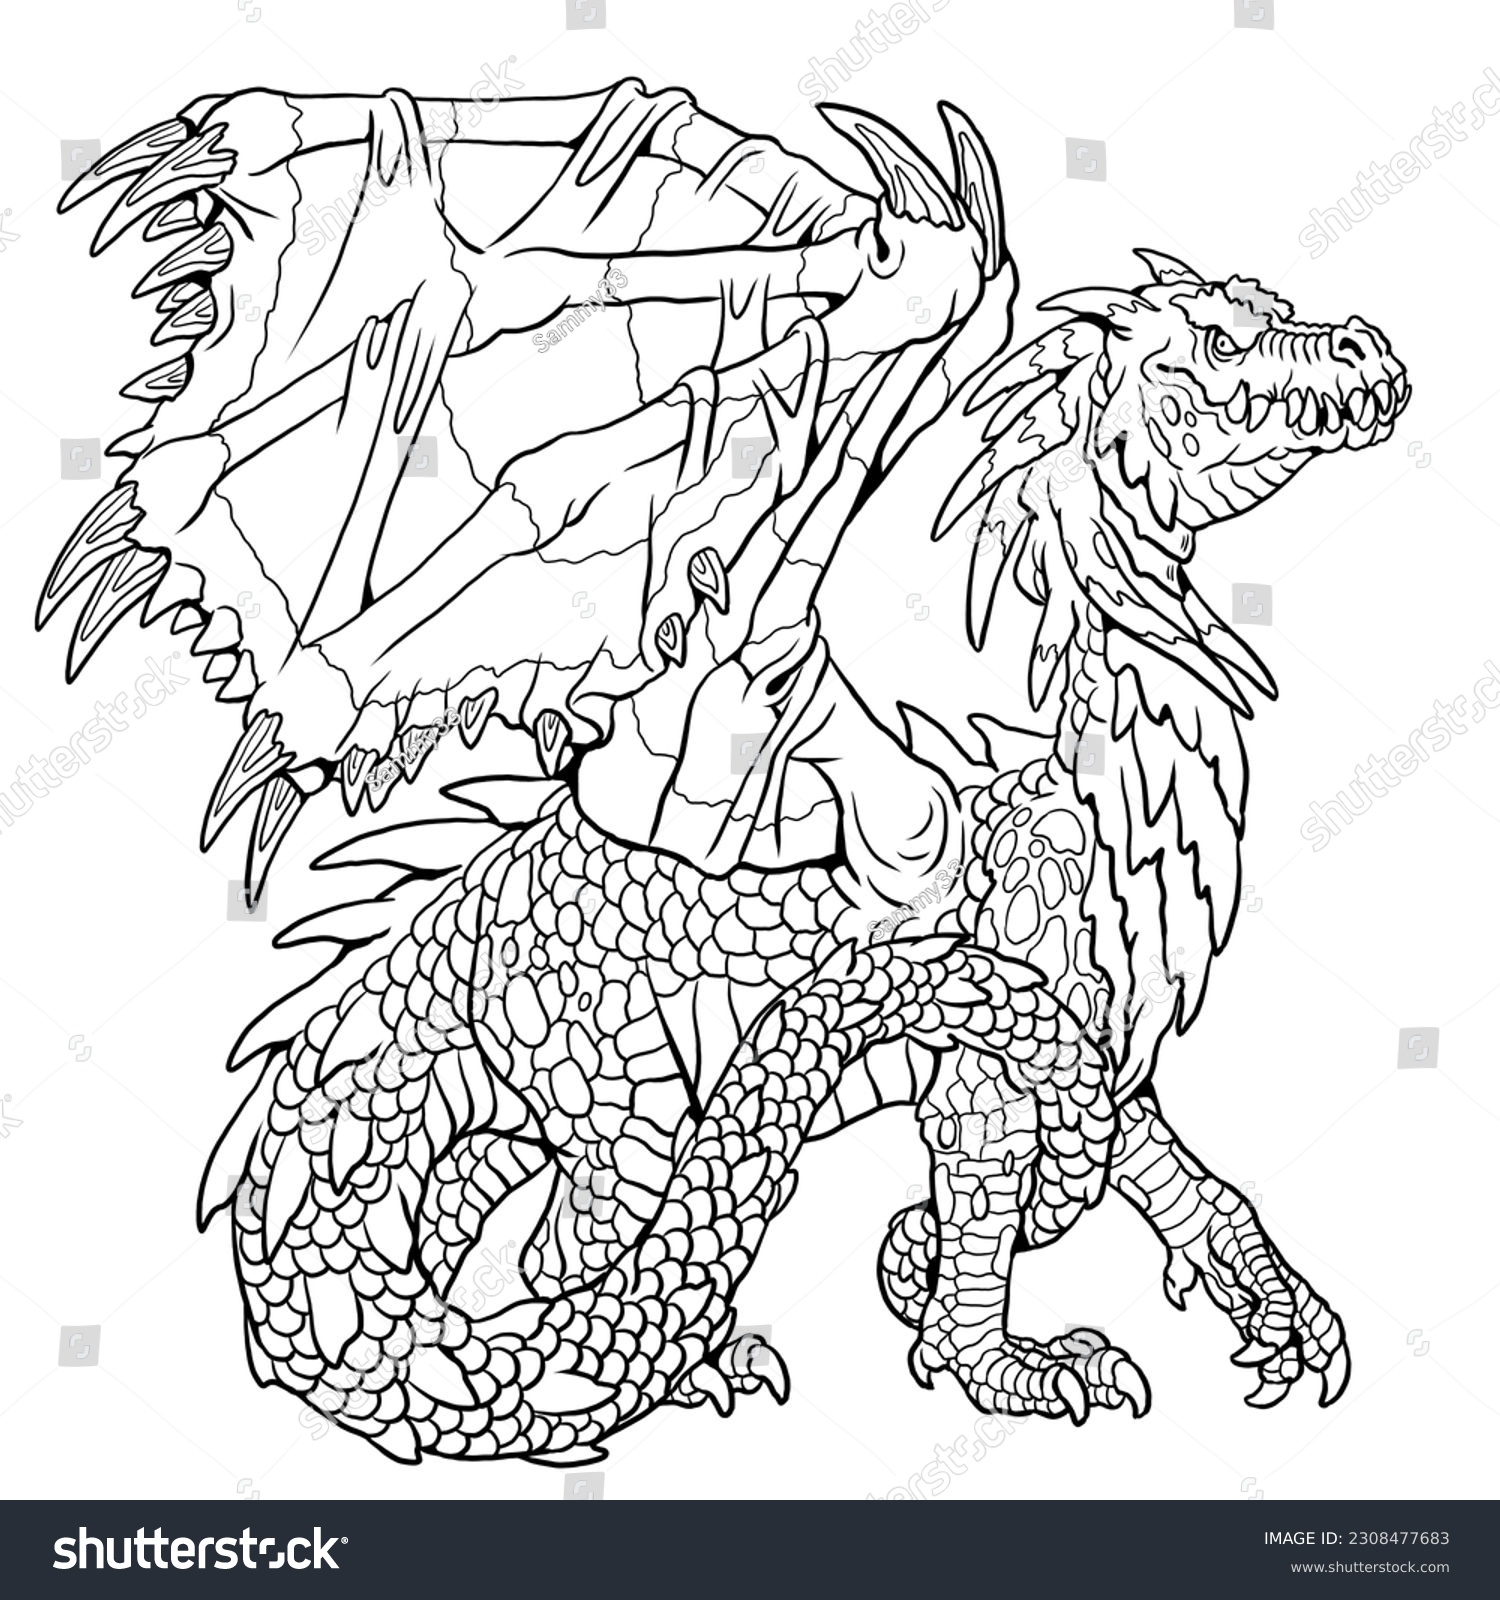 Dragon coloring page fantasy illustration mythical stock illustration